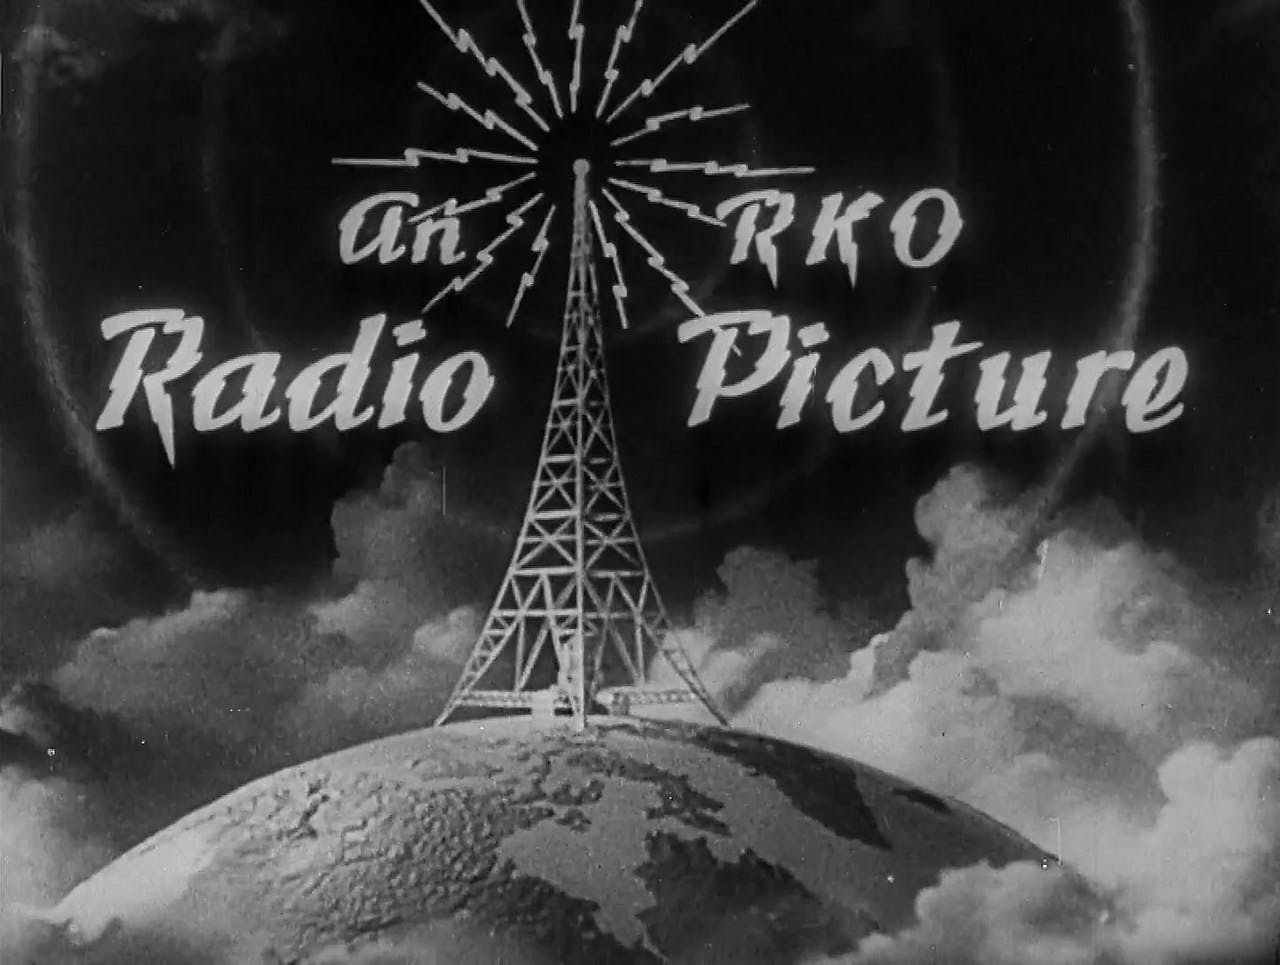 RKO Pictures was one of the "Big Five" film studios of Hollywood's Golden Age